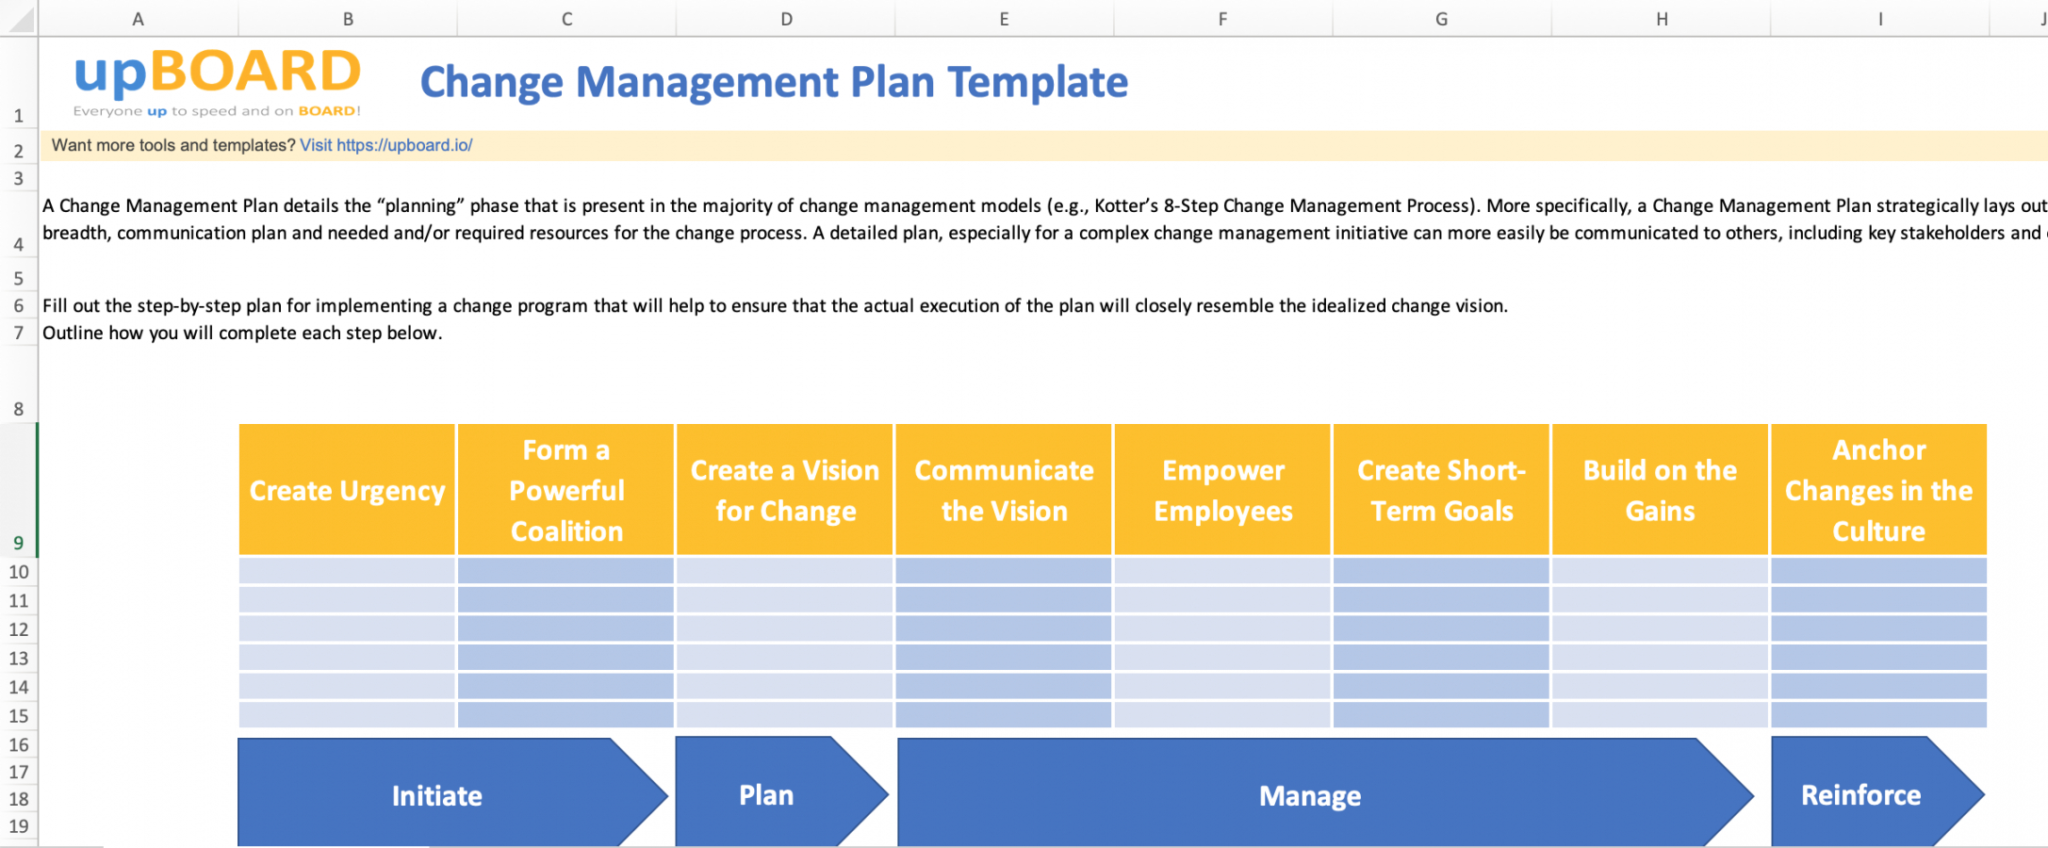 Editable Change Management Plan Online Software Tools And Templates